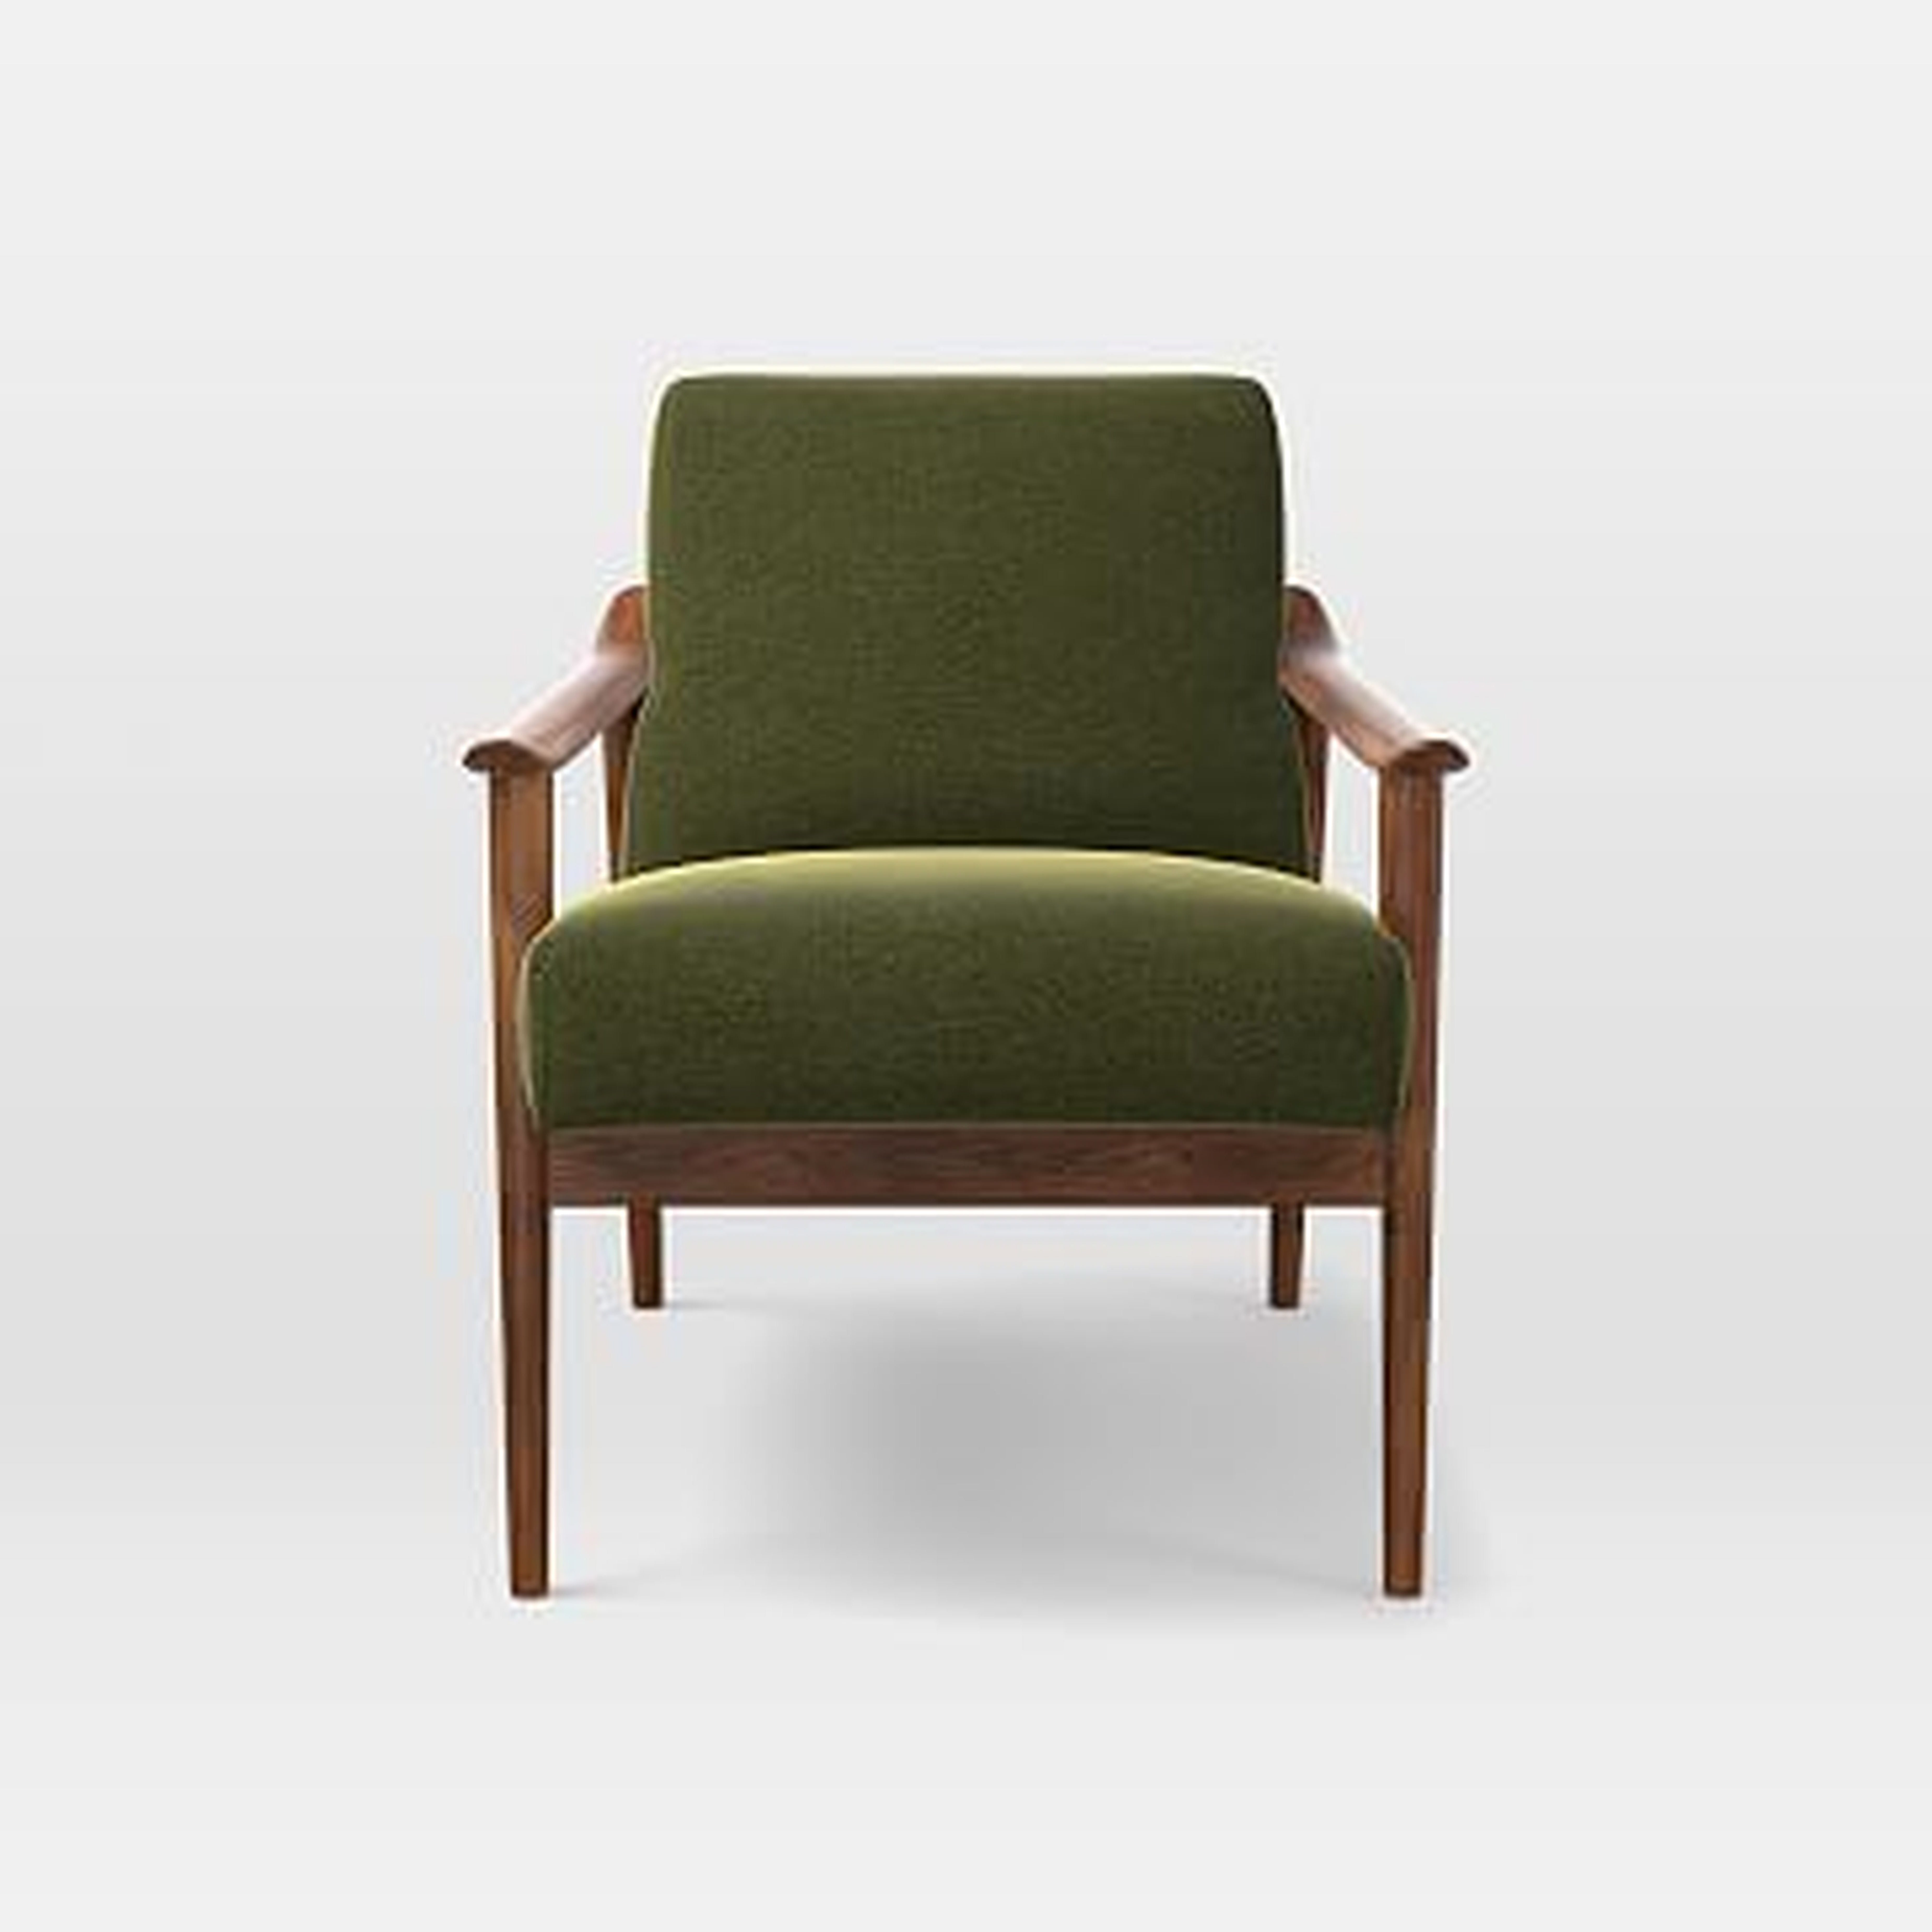 Mid-Century Show Wood Chair, Poly, Distressed Velvet, Olive, Pecan - West Elm